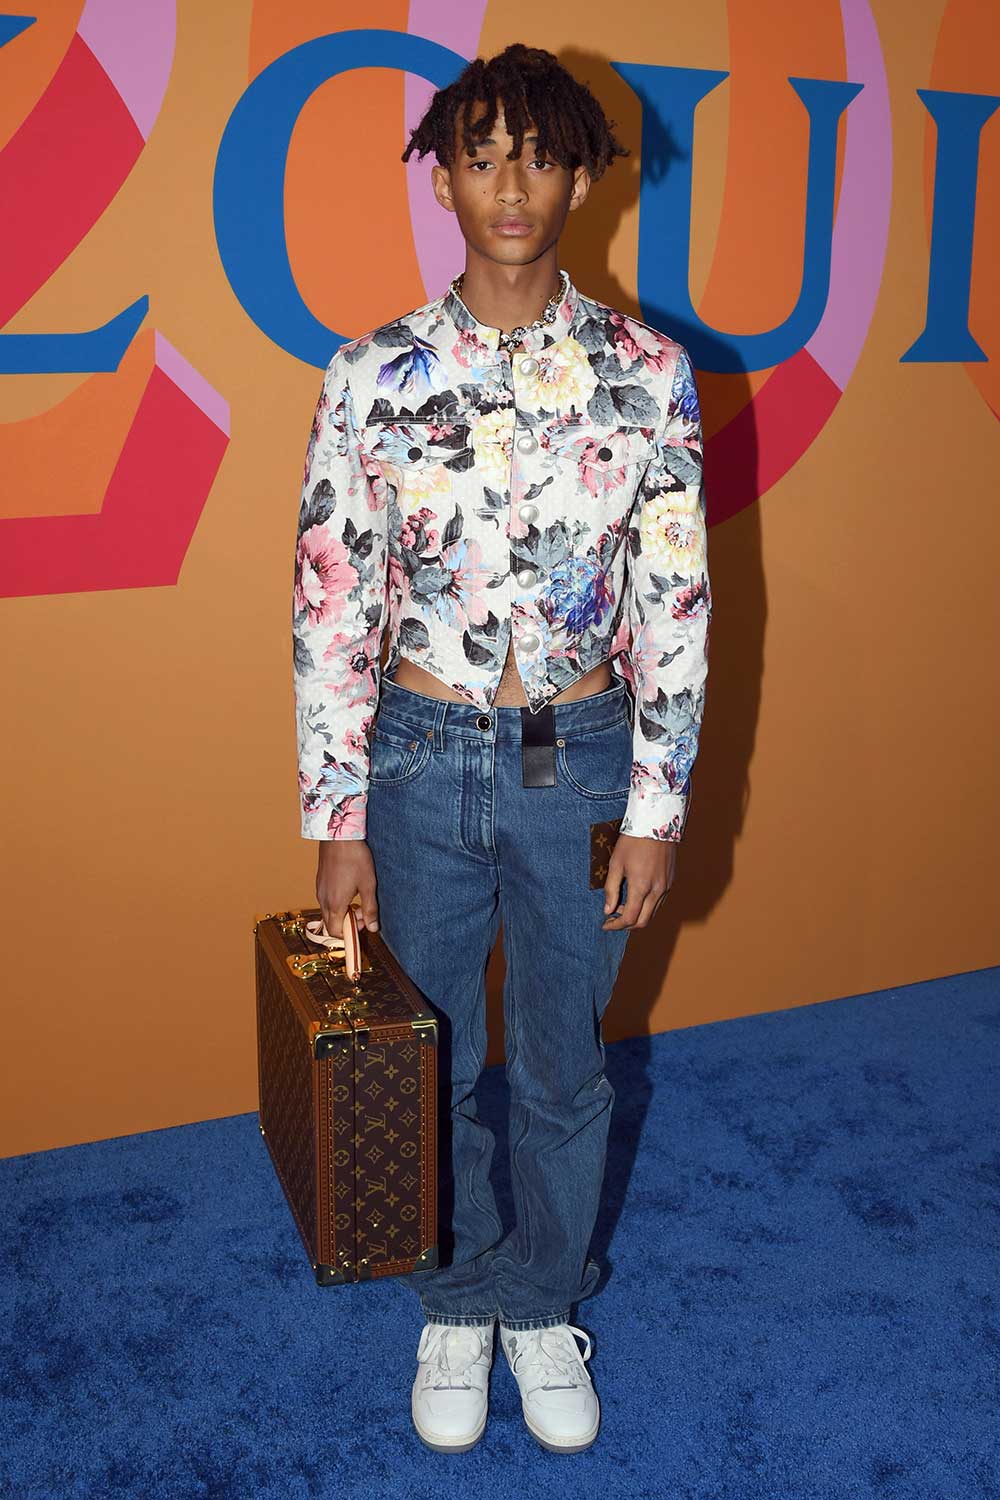 Fashion, Shopping & Style, Jaden Smith Wins Fashion Week in a Mirrored  Crop Top at Louis Vuitton